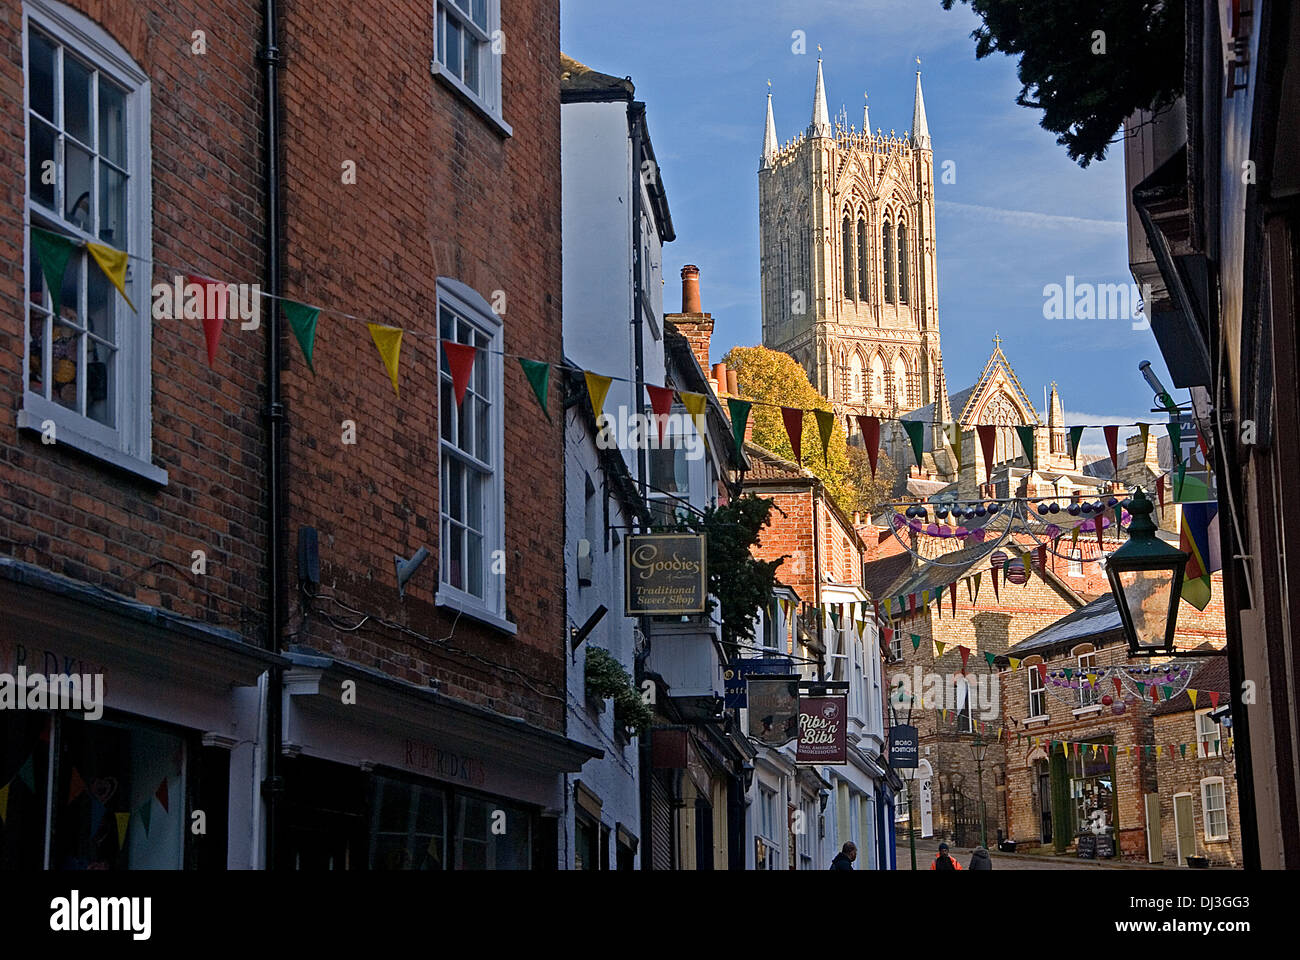 Lincoln Cathedral is an iconic landmark building set high on a hill overlooking the city and the Lincolnshire Fens in England. Stock Photo